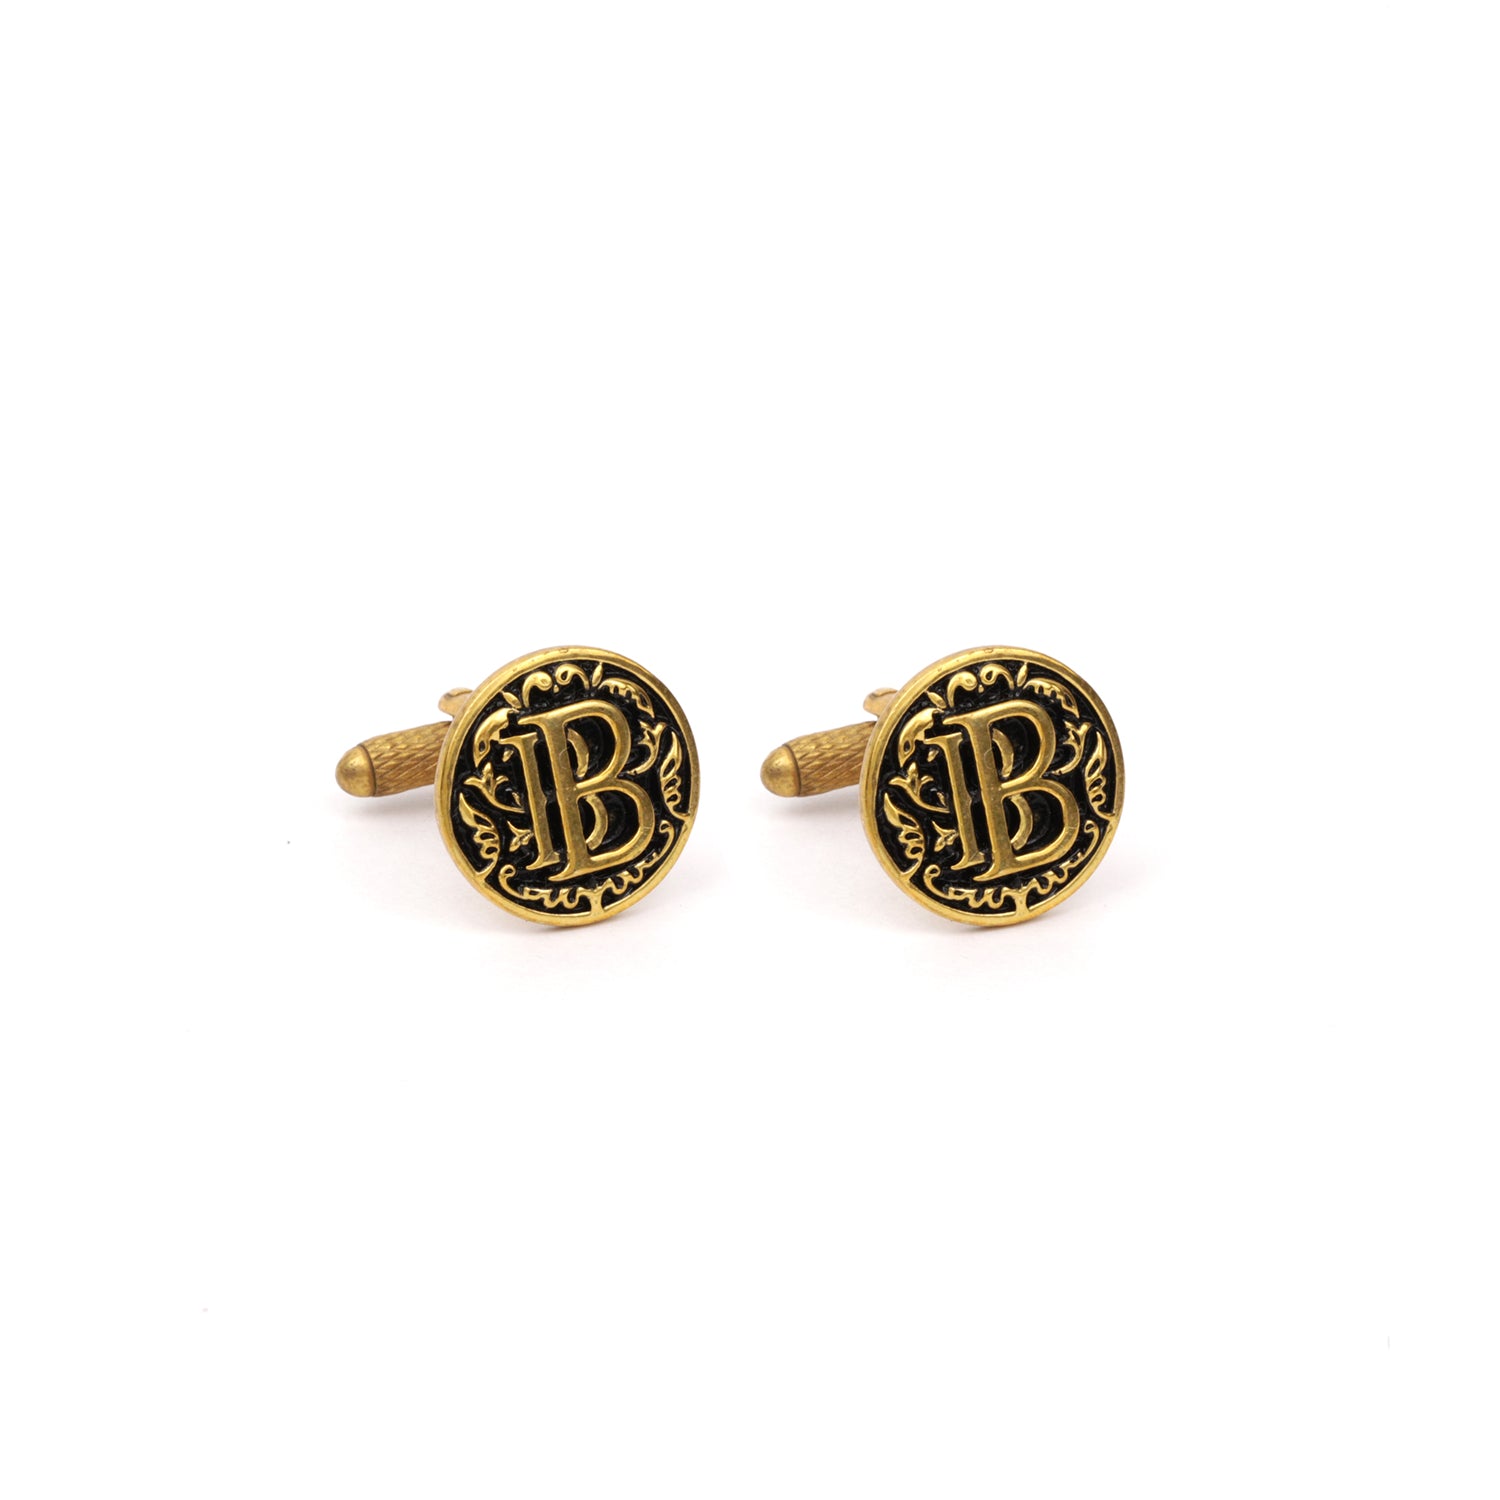 Personalized Initial Cufflink Set with Antique Filigree Work